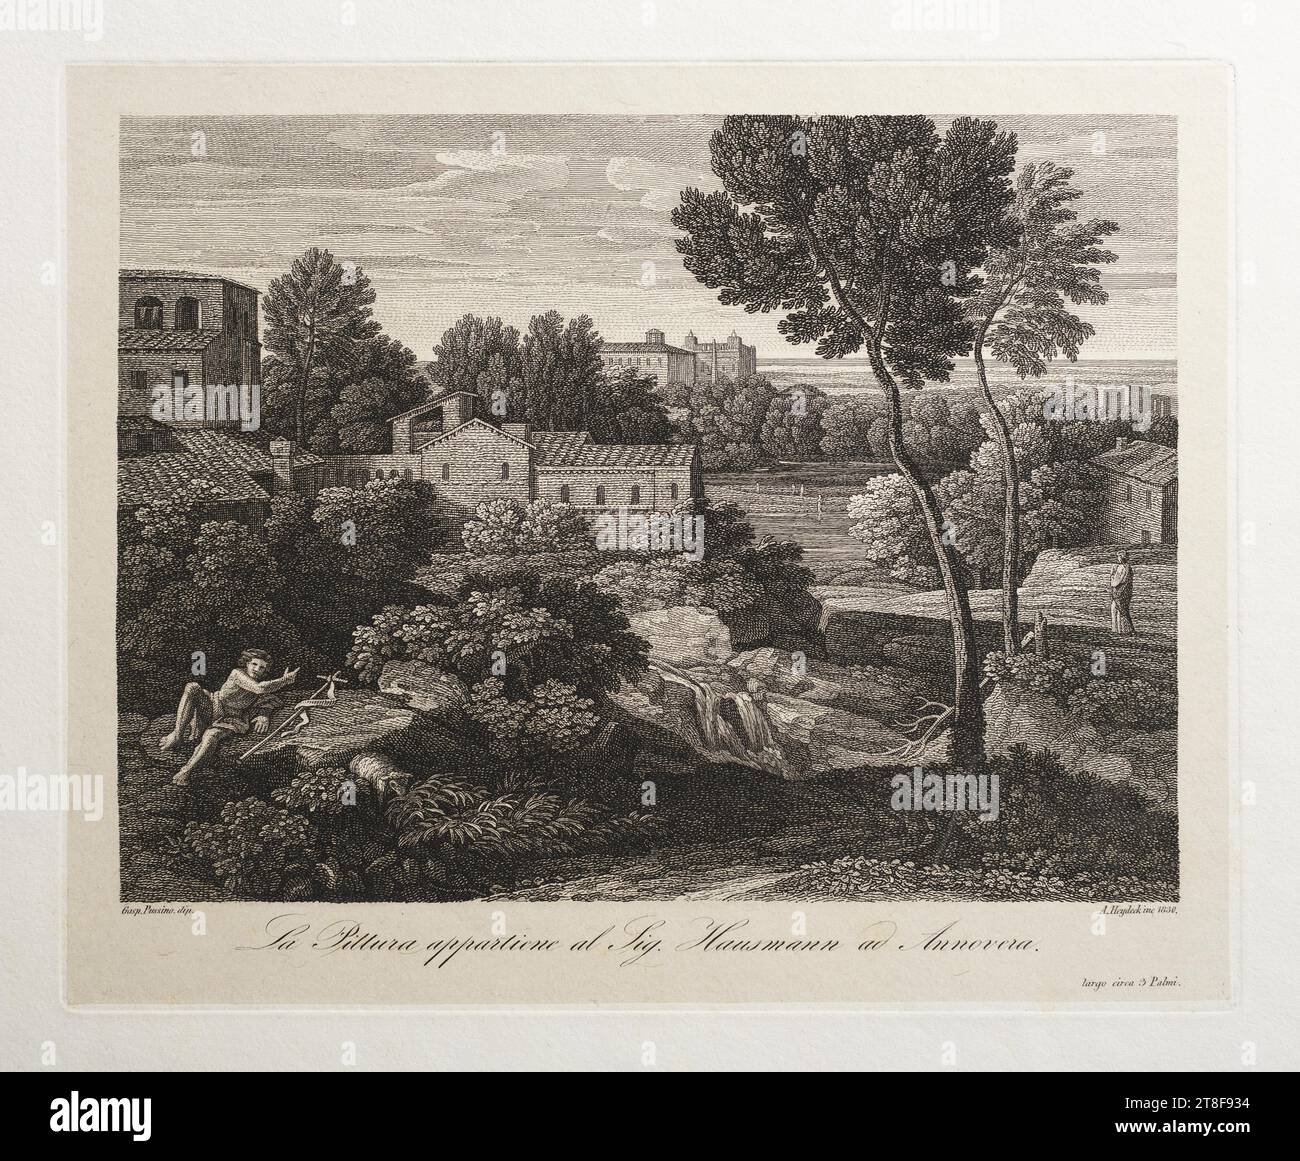 Landscape with John the Baptist, Adolf von Heydeck, 1830, Graphic Art, Copper Engraving, Paper, Color, Printer's ink, Copper engraving, Printet, Height (plate size?) 197 mm, Width (plate size?) 244 mm, Gasp.Pussino dip., A.Heydeck nc 1830, La Pittura appartiene al Sig. Hausmann ad Annovera., largo circa 3 Palmi, Graphic Design, European, Modernity (1800 - 1914 Stock Photo